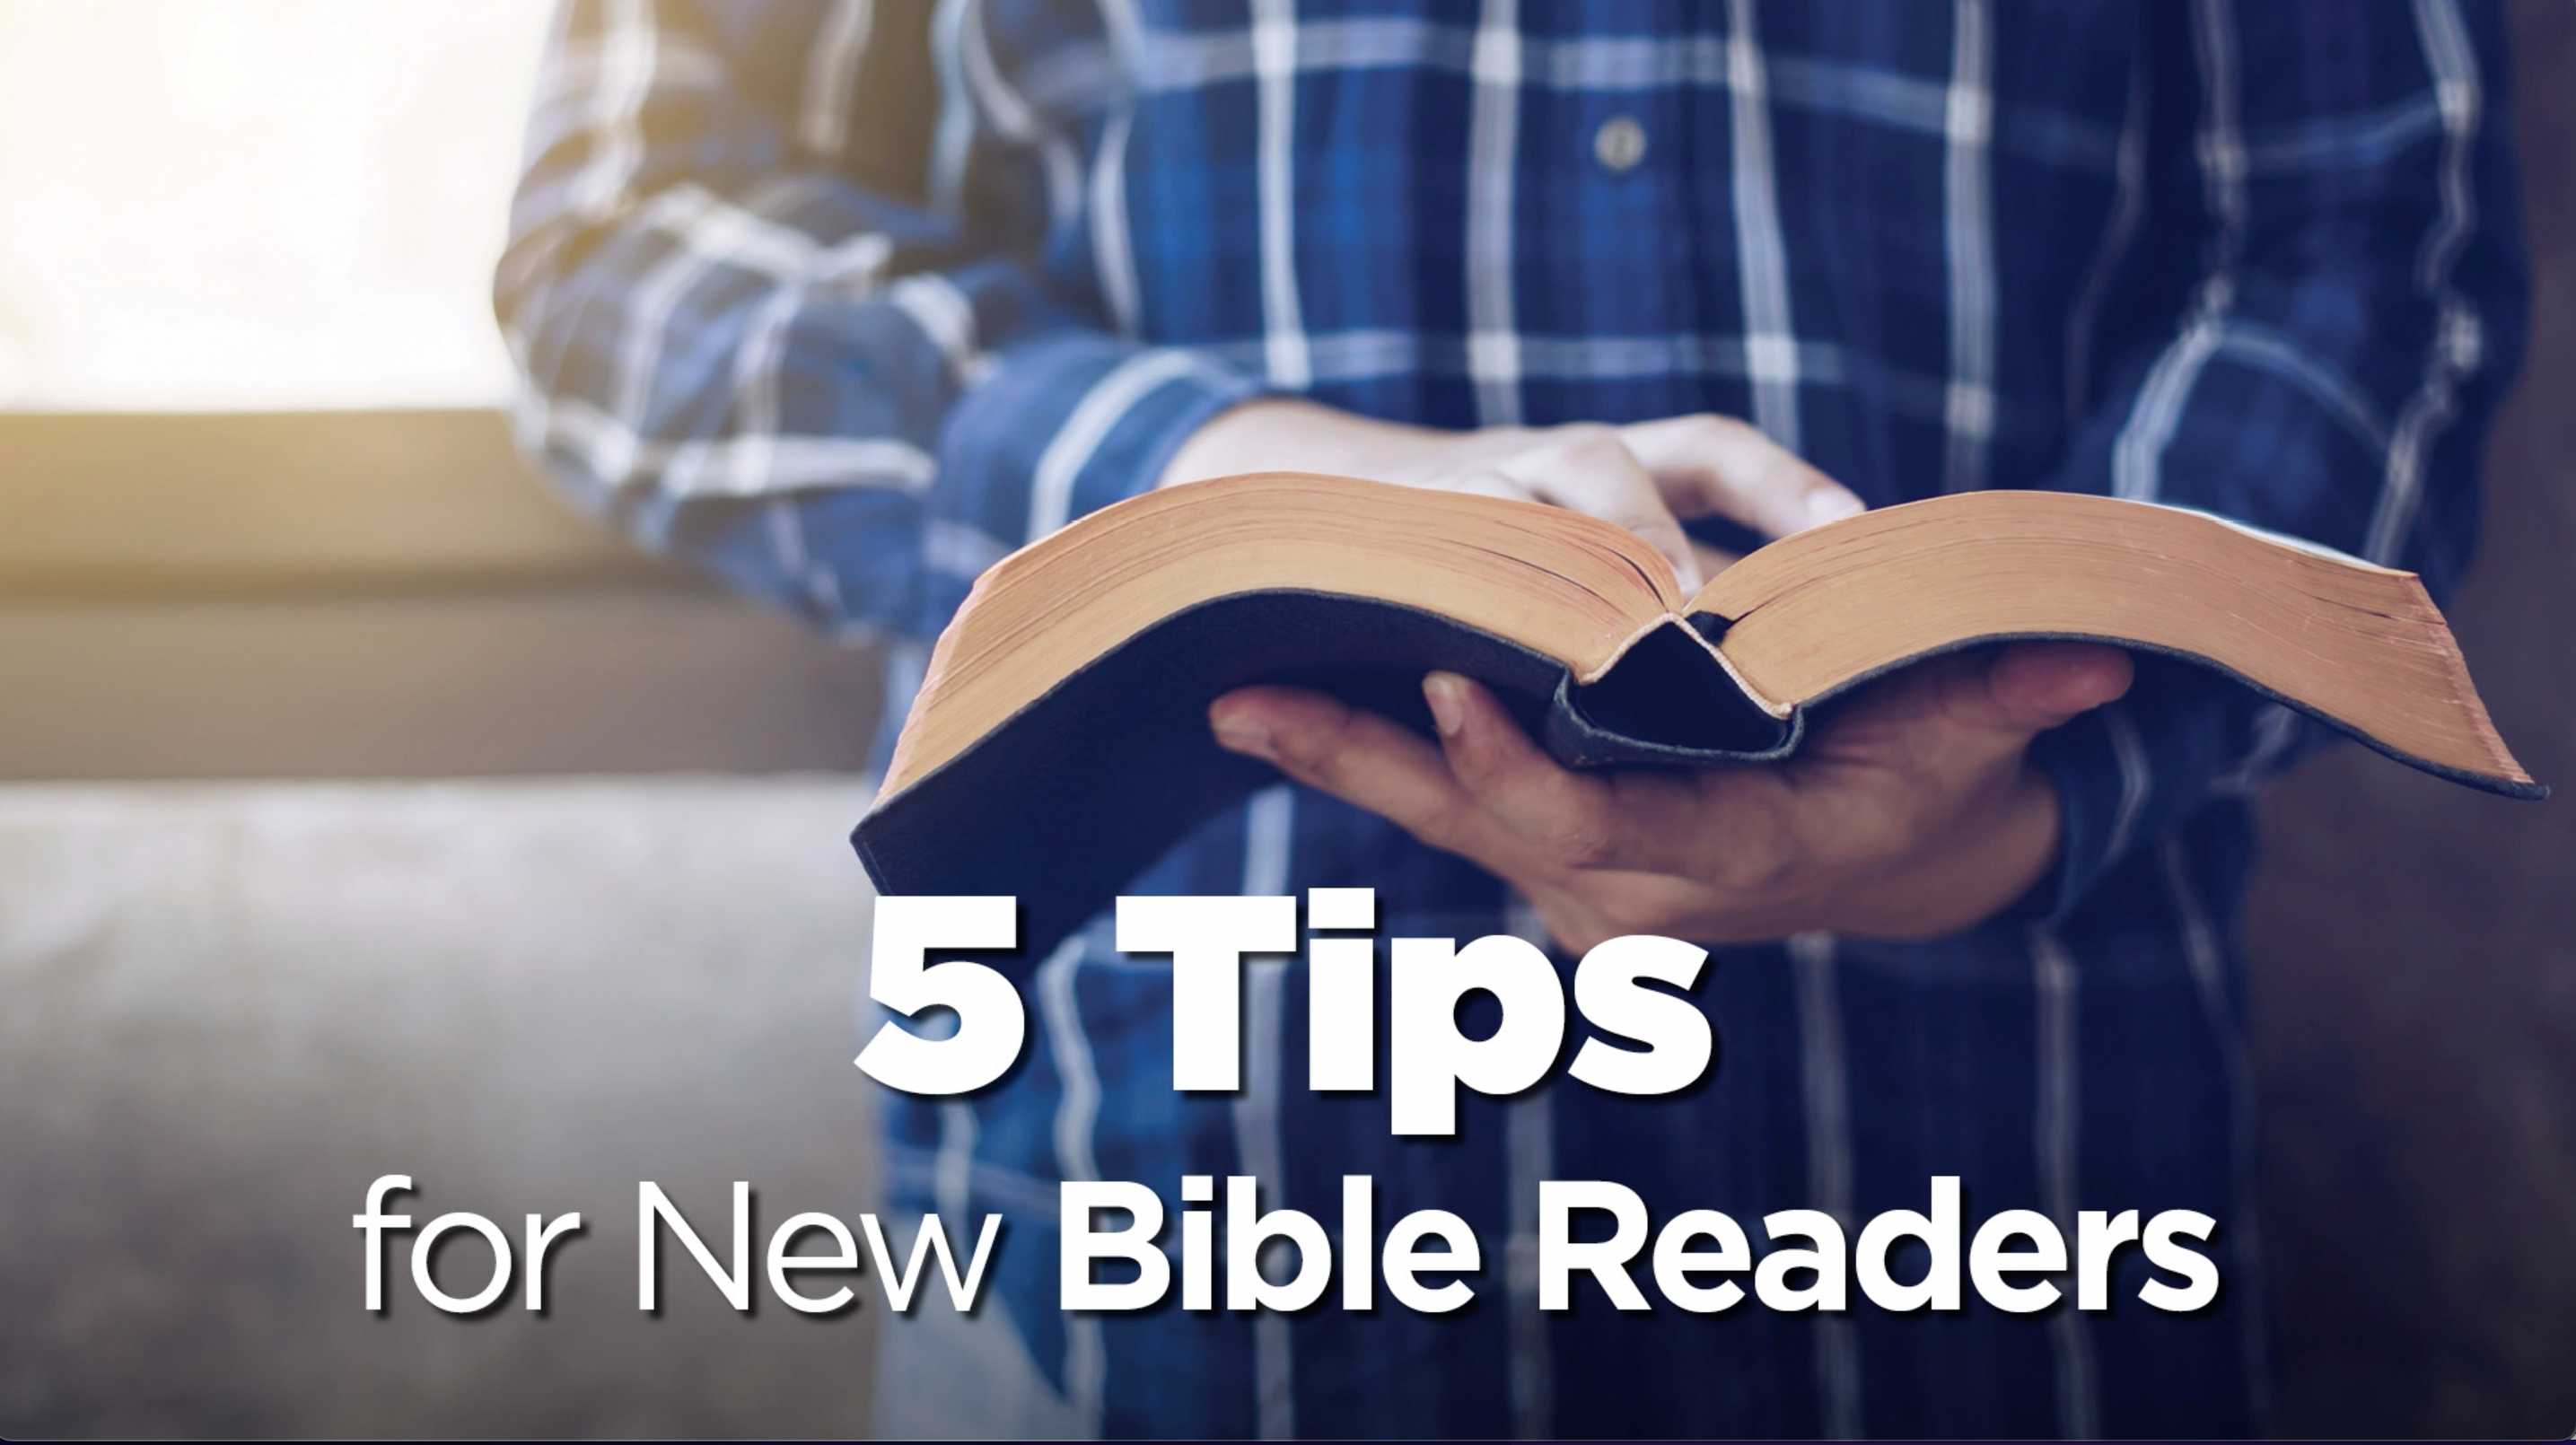 5 tips for new Bible readers